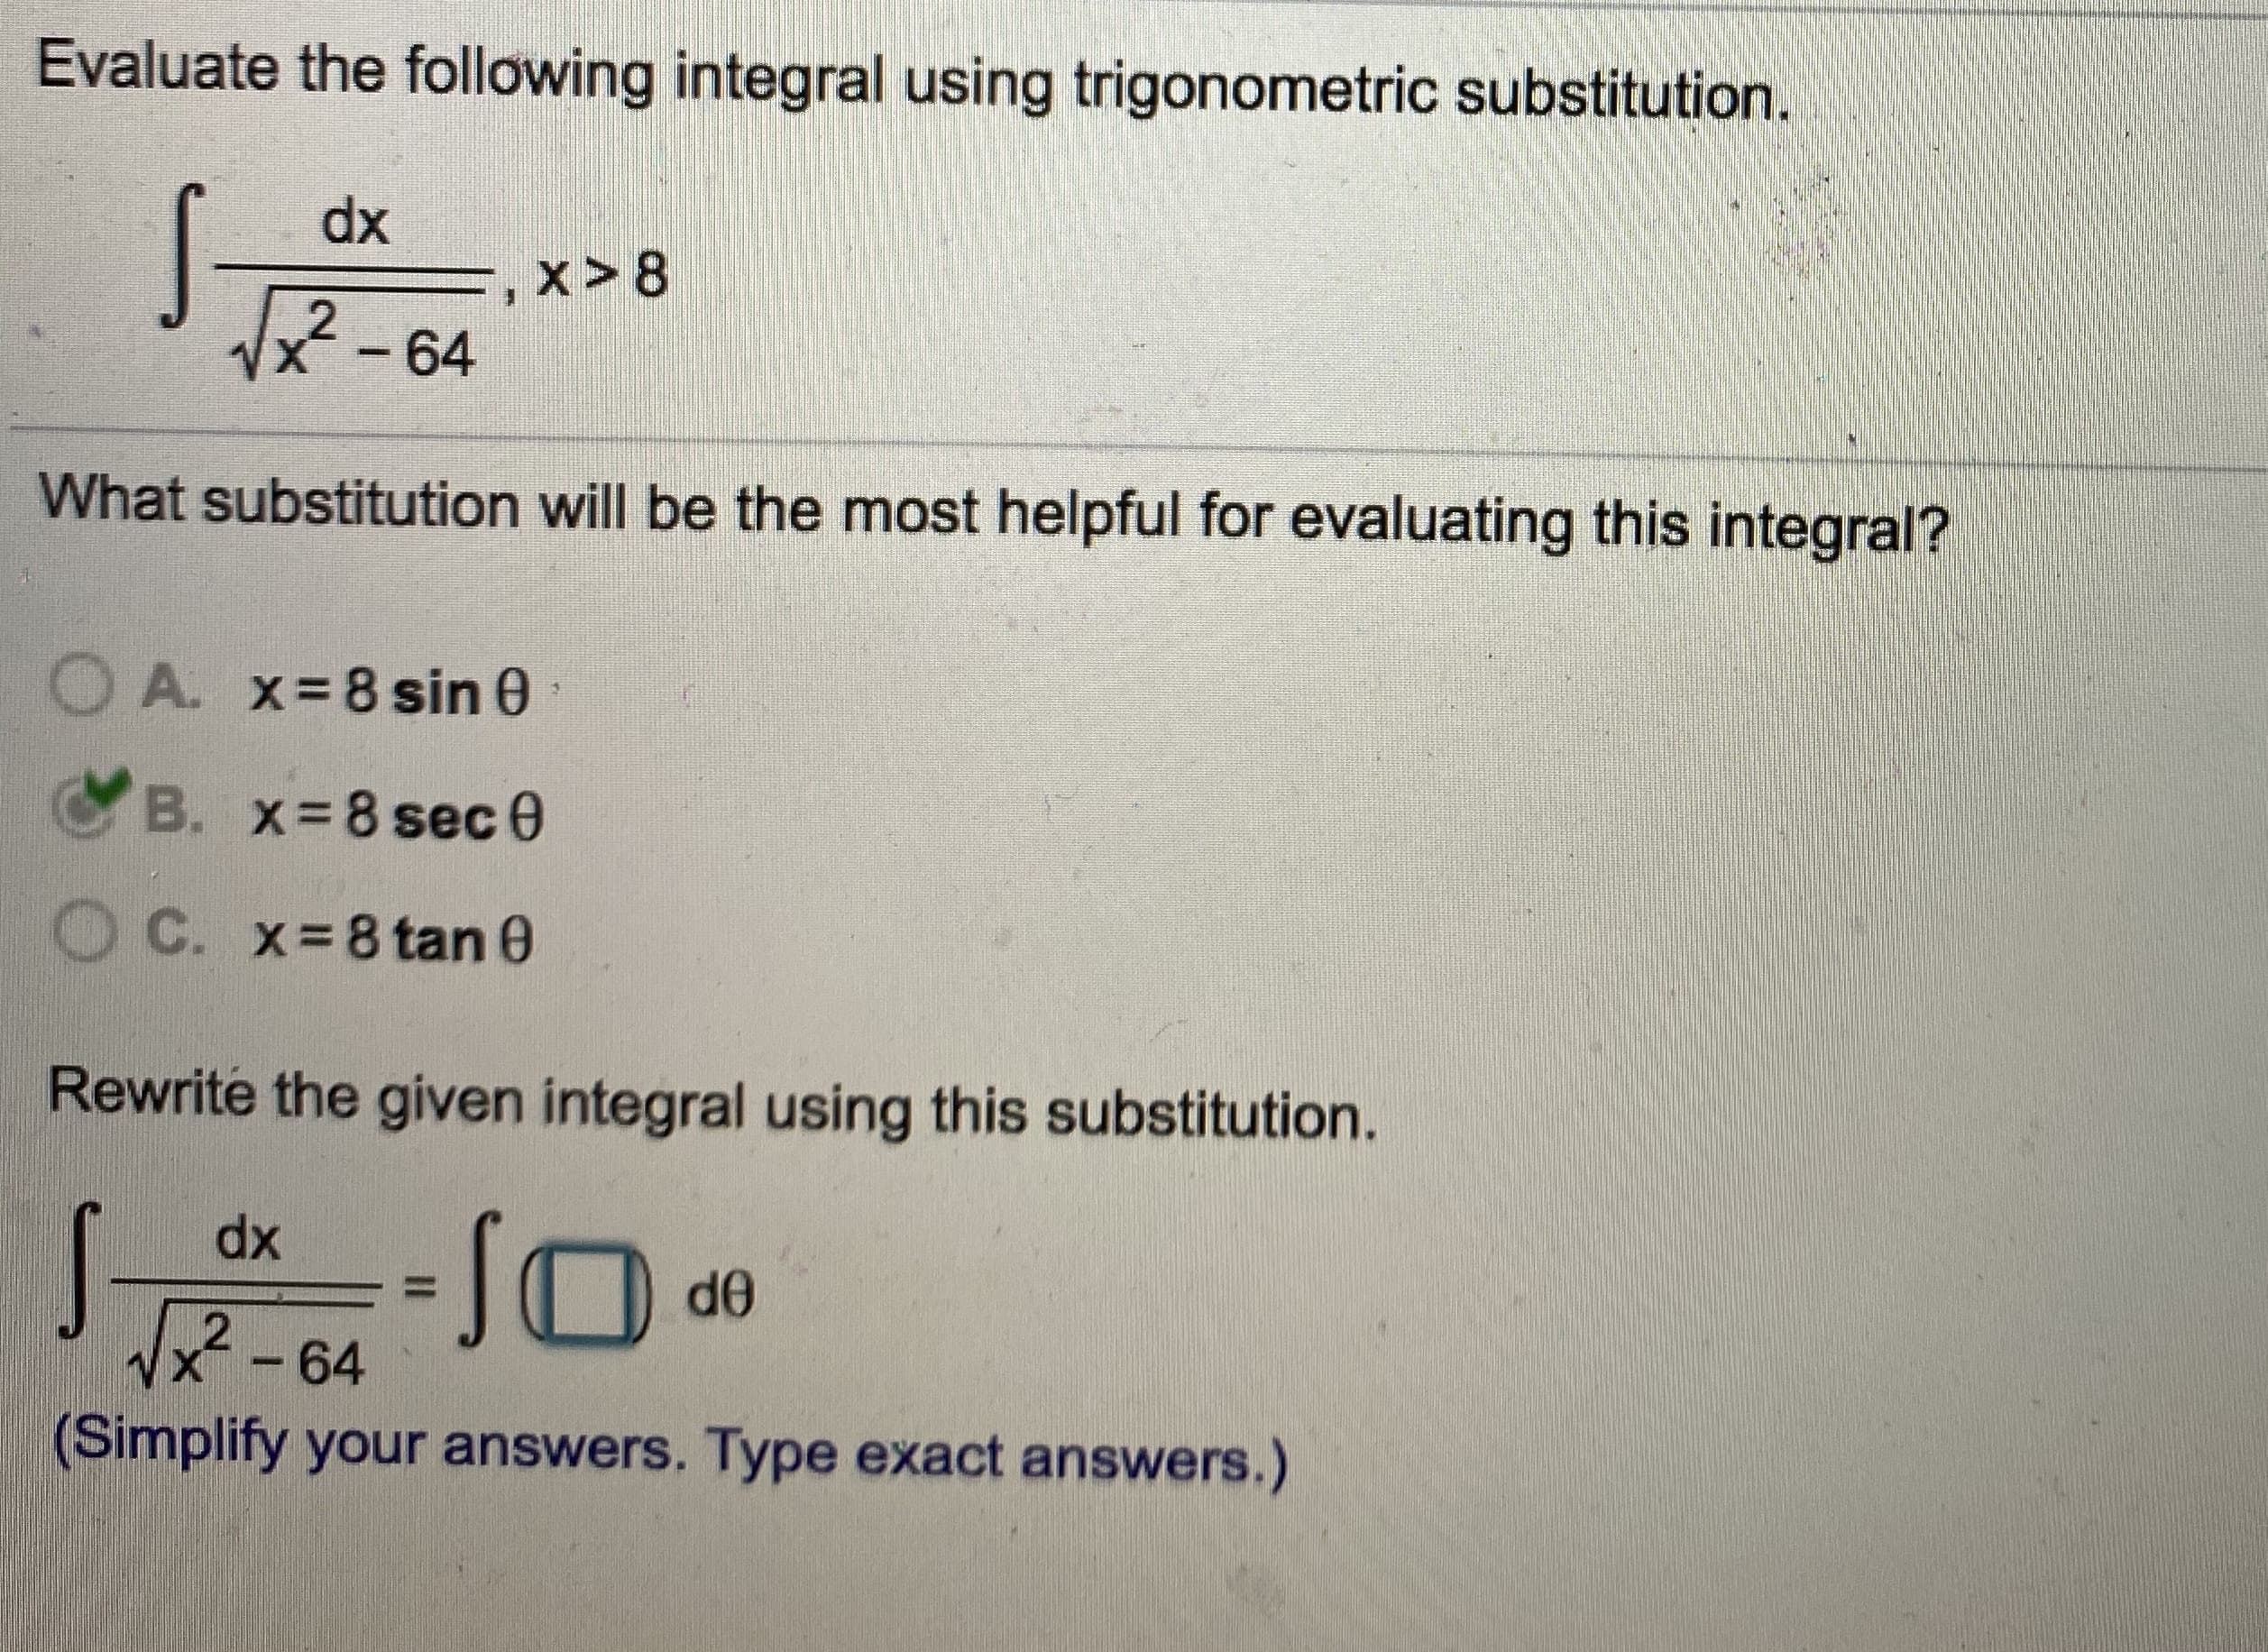 Evaluate the following integral using trigonometric substitution.
dx
x>8
Vx-64
